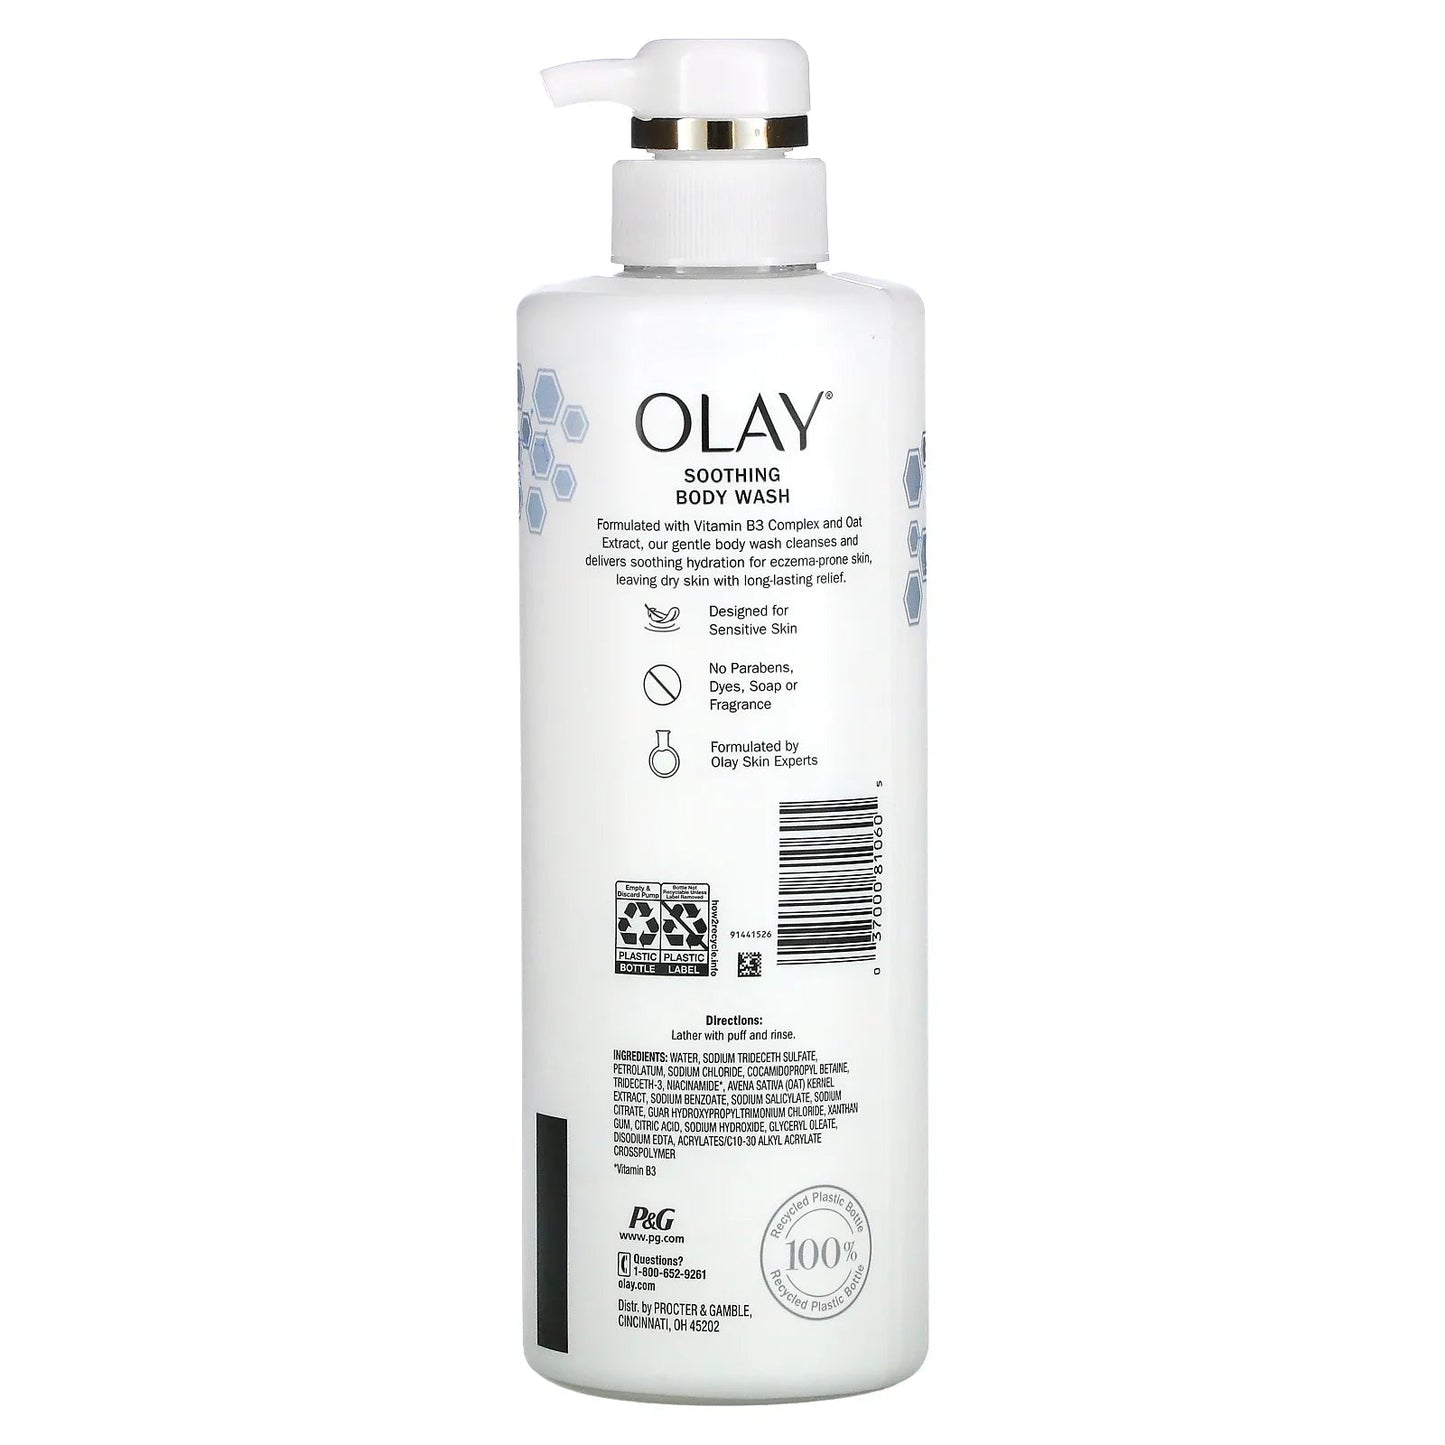 Olay Soothing Body Wash for Sensitive Skin -Ezcema Prone Skin with Oat Extract, 17.9 fl oz - 530 ml - Ome's Beauty Mart